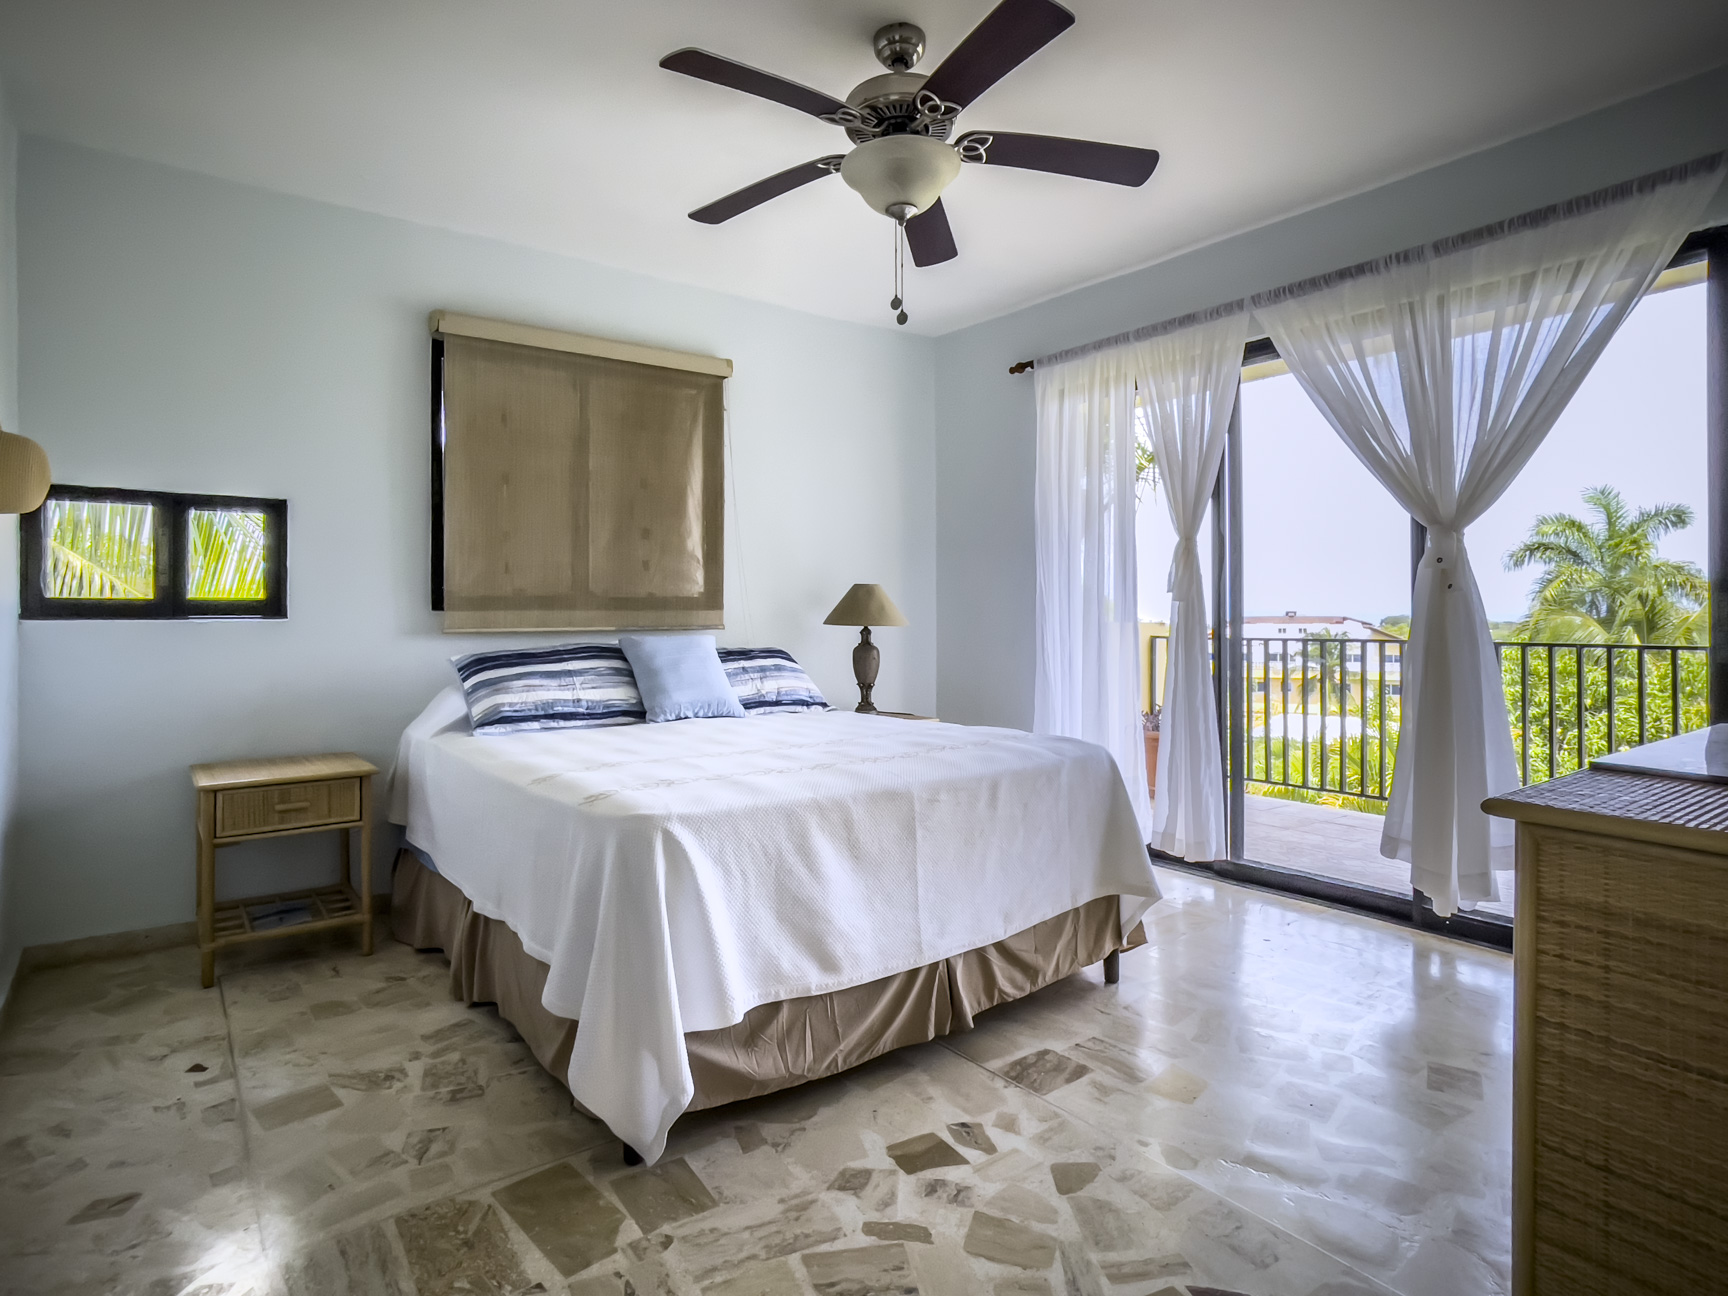 Trade Winds Condo Second Bedroom with walkout to Balcony